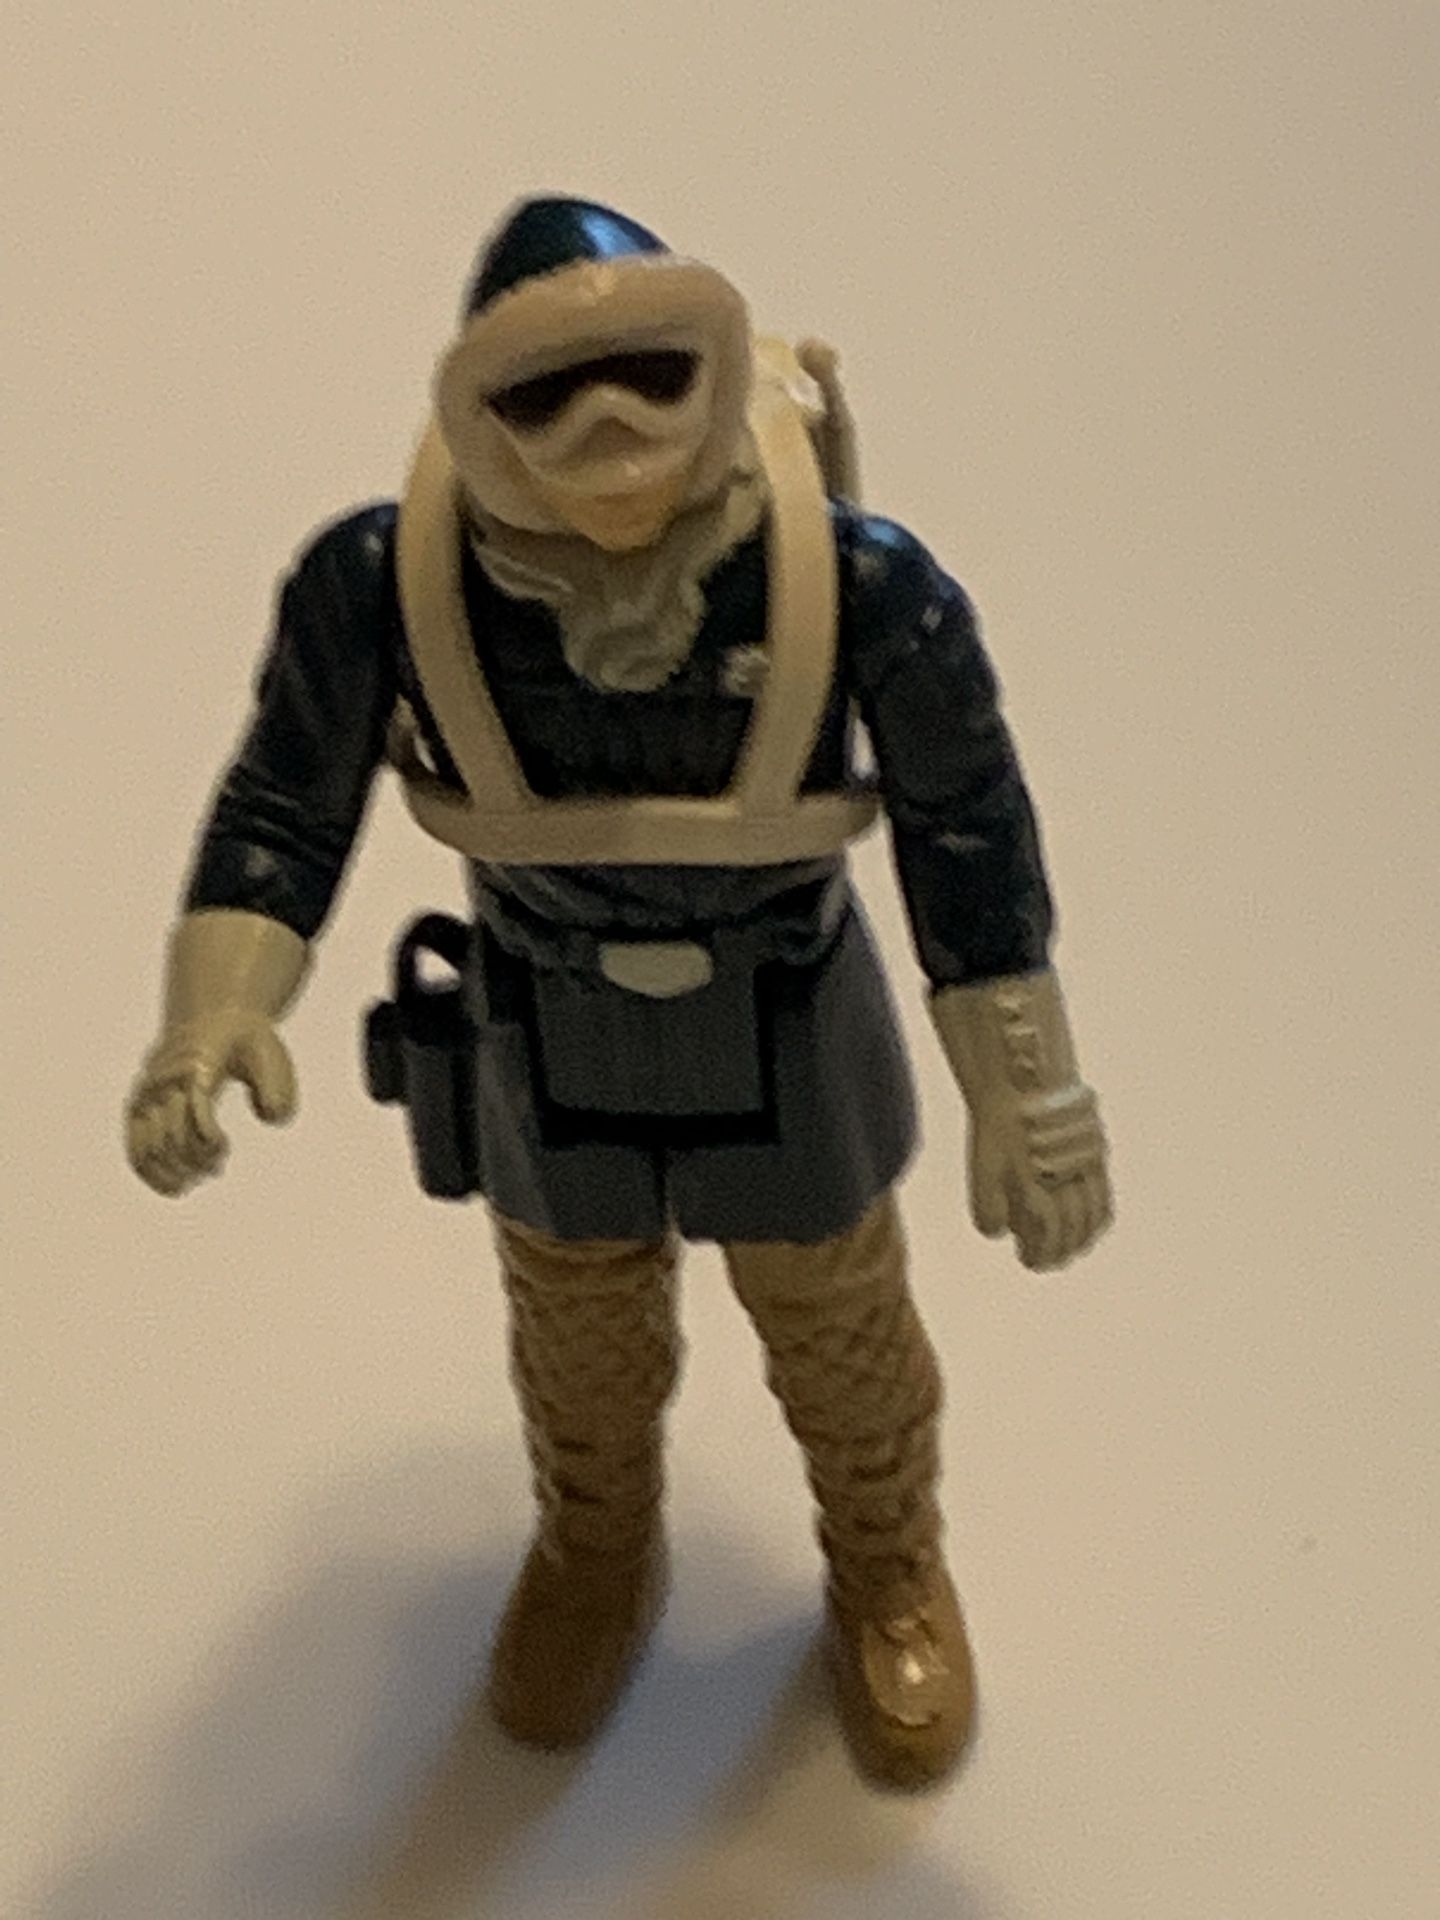 STAR WARS HAN SOLO “HOTH OUTFIT” with Survival Pack from 1980